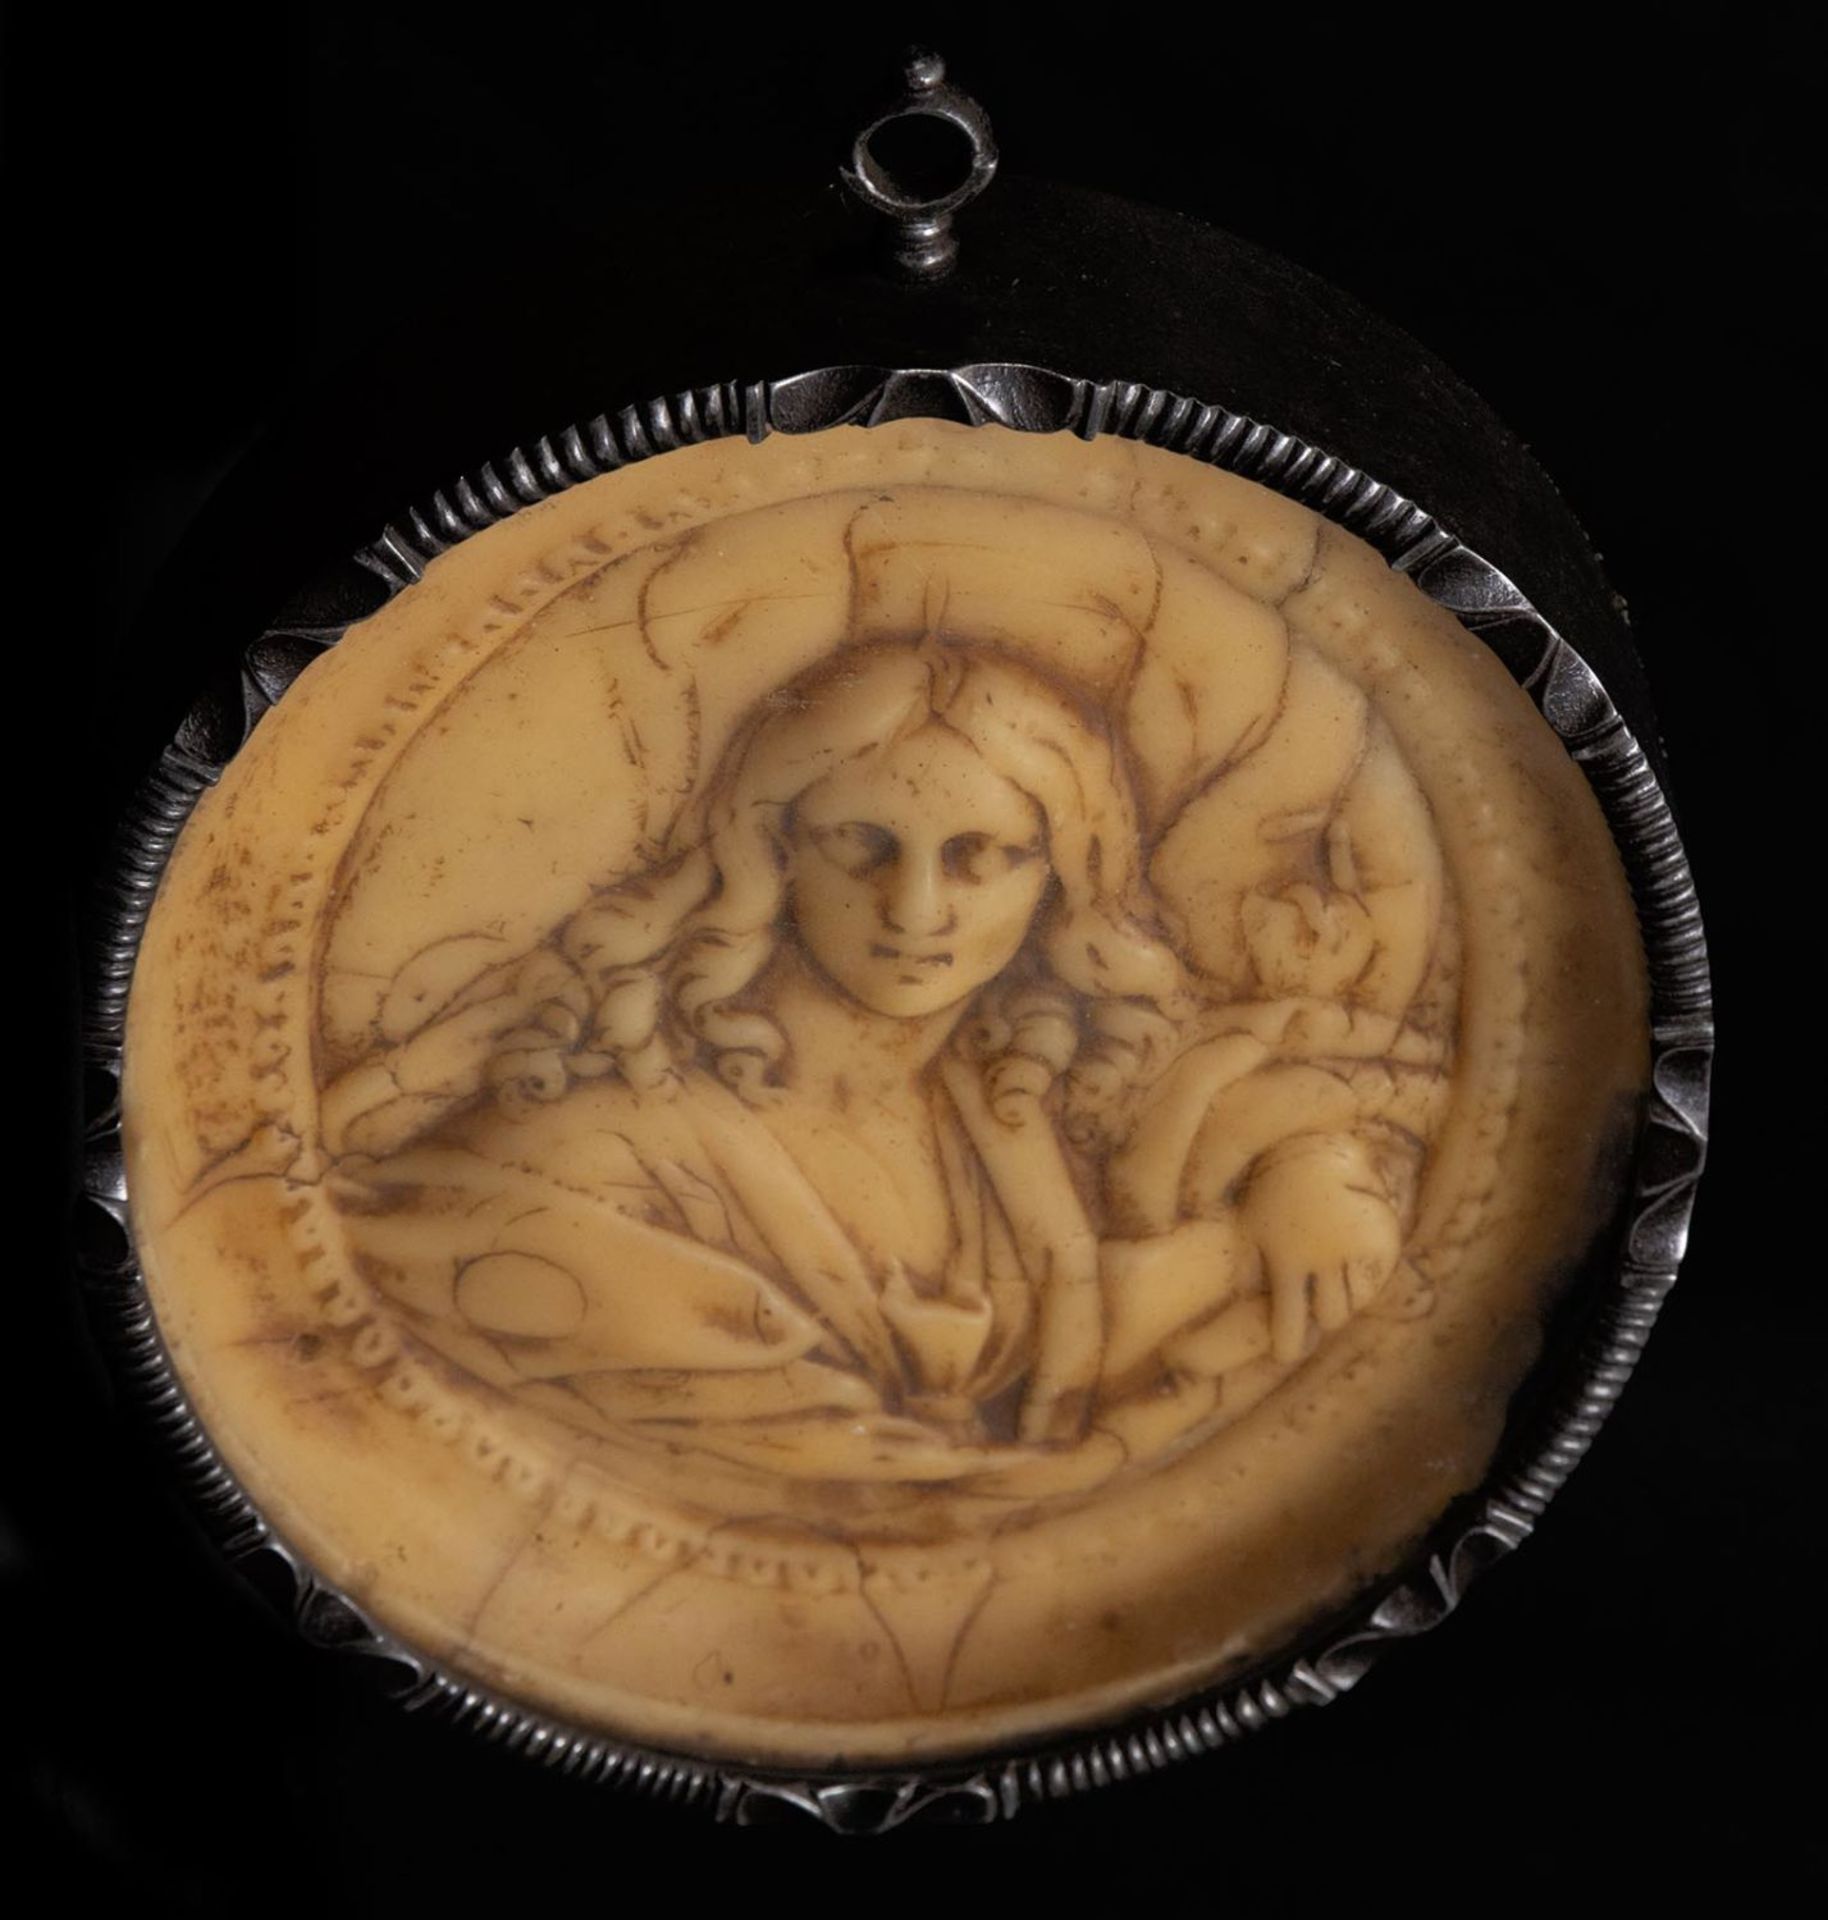 Oval with wax hair reliquary with Saint John the Evangelist, Italian Renaissance work from the 16th  - Image 3 of 4